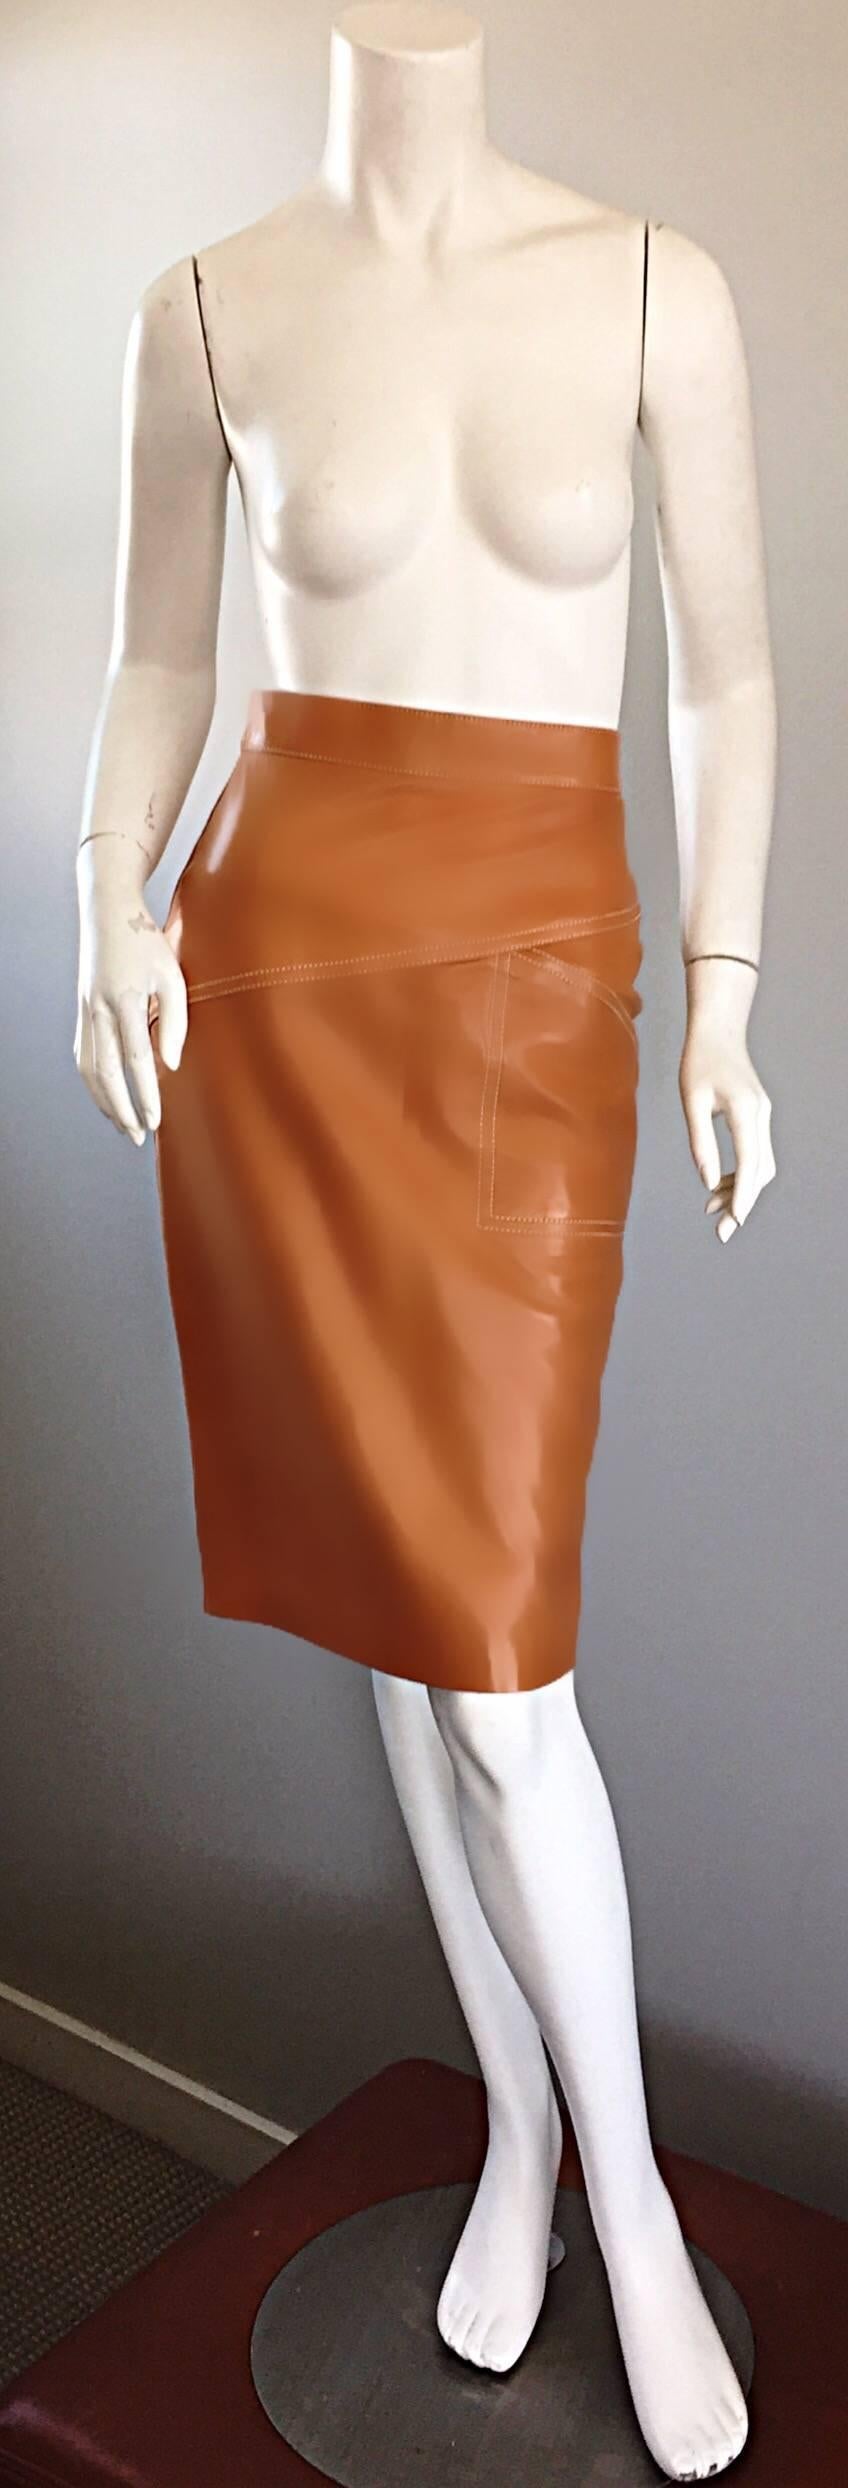 The perfect vintage ESCADA by MARGARETHA LEY high waisted leather pencil skirt! Incredible rich saddle tan color is perfect all year, and is super versatile. This color matches with ANY color! Luxurious soft butter leather feels amazing against the